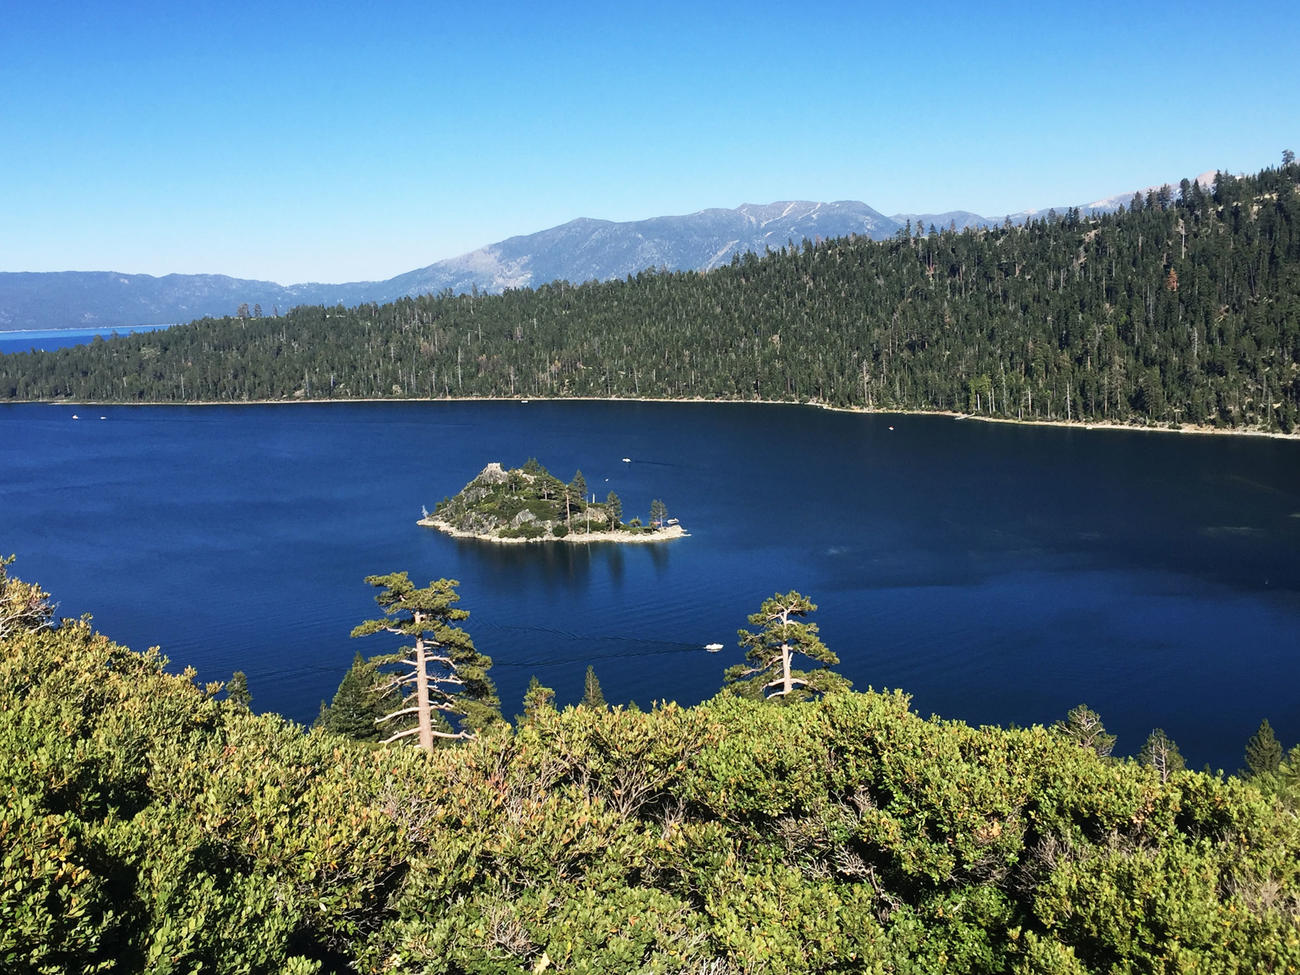 Camping and hiking at D.L. Bliss and Emerald Bay